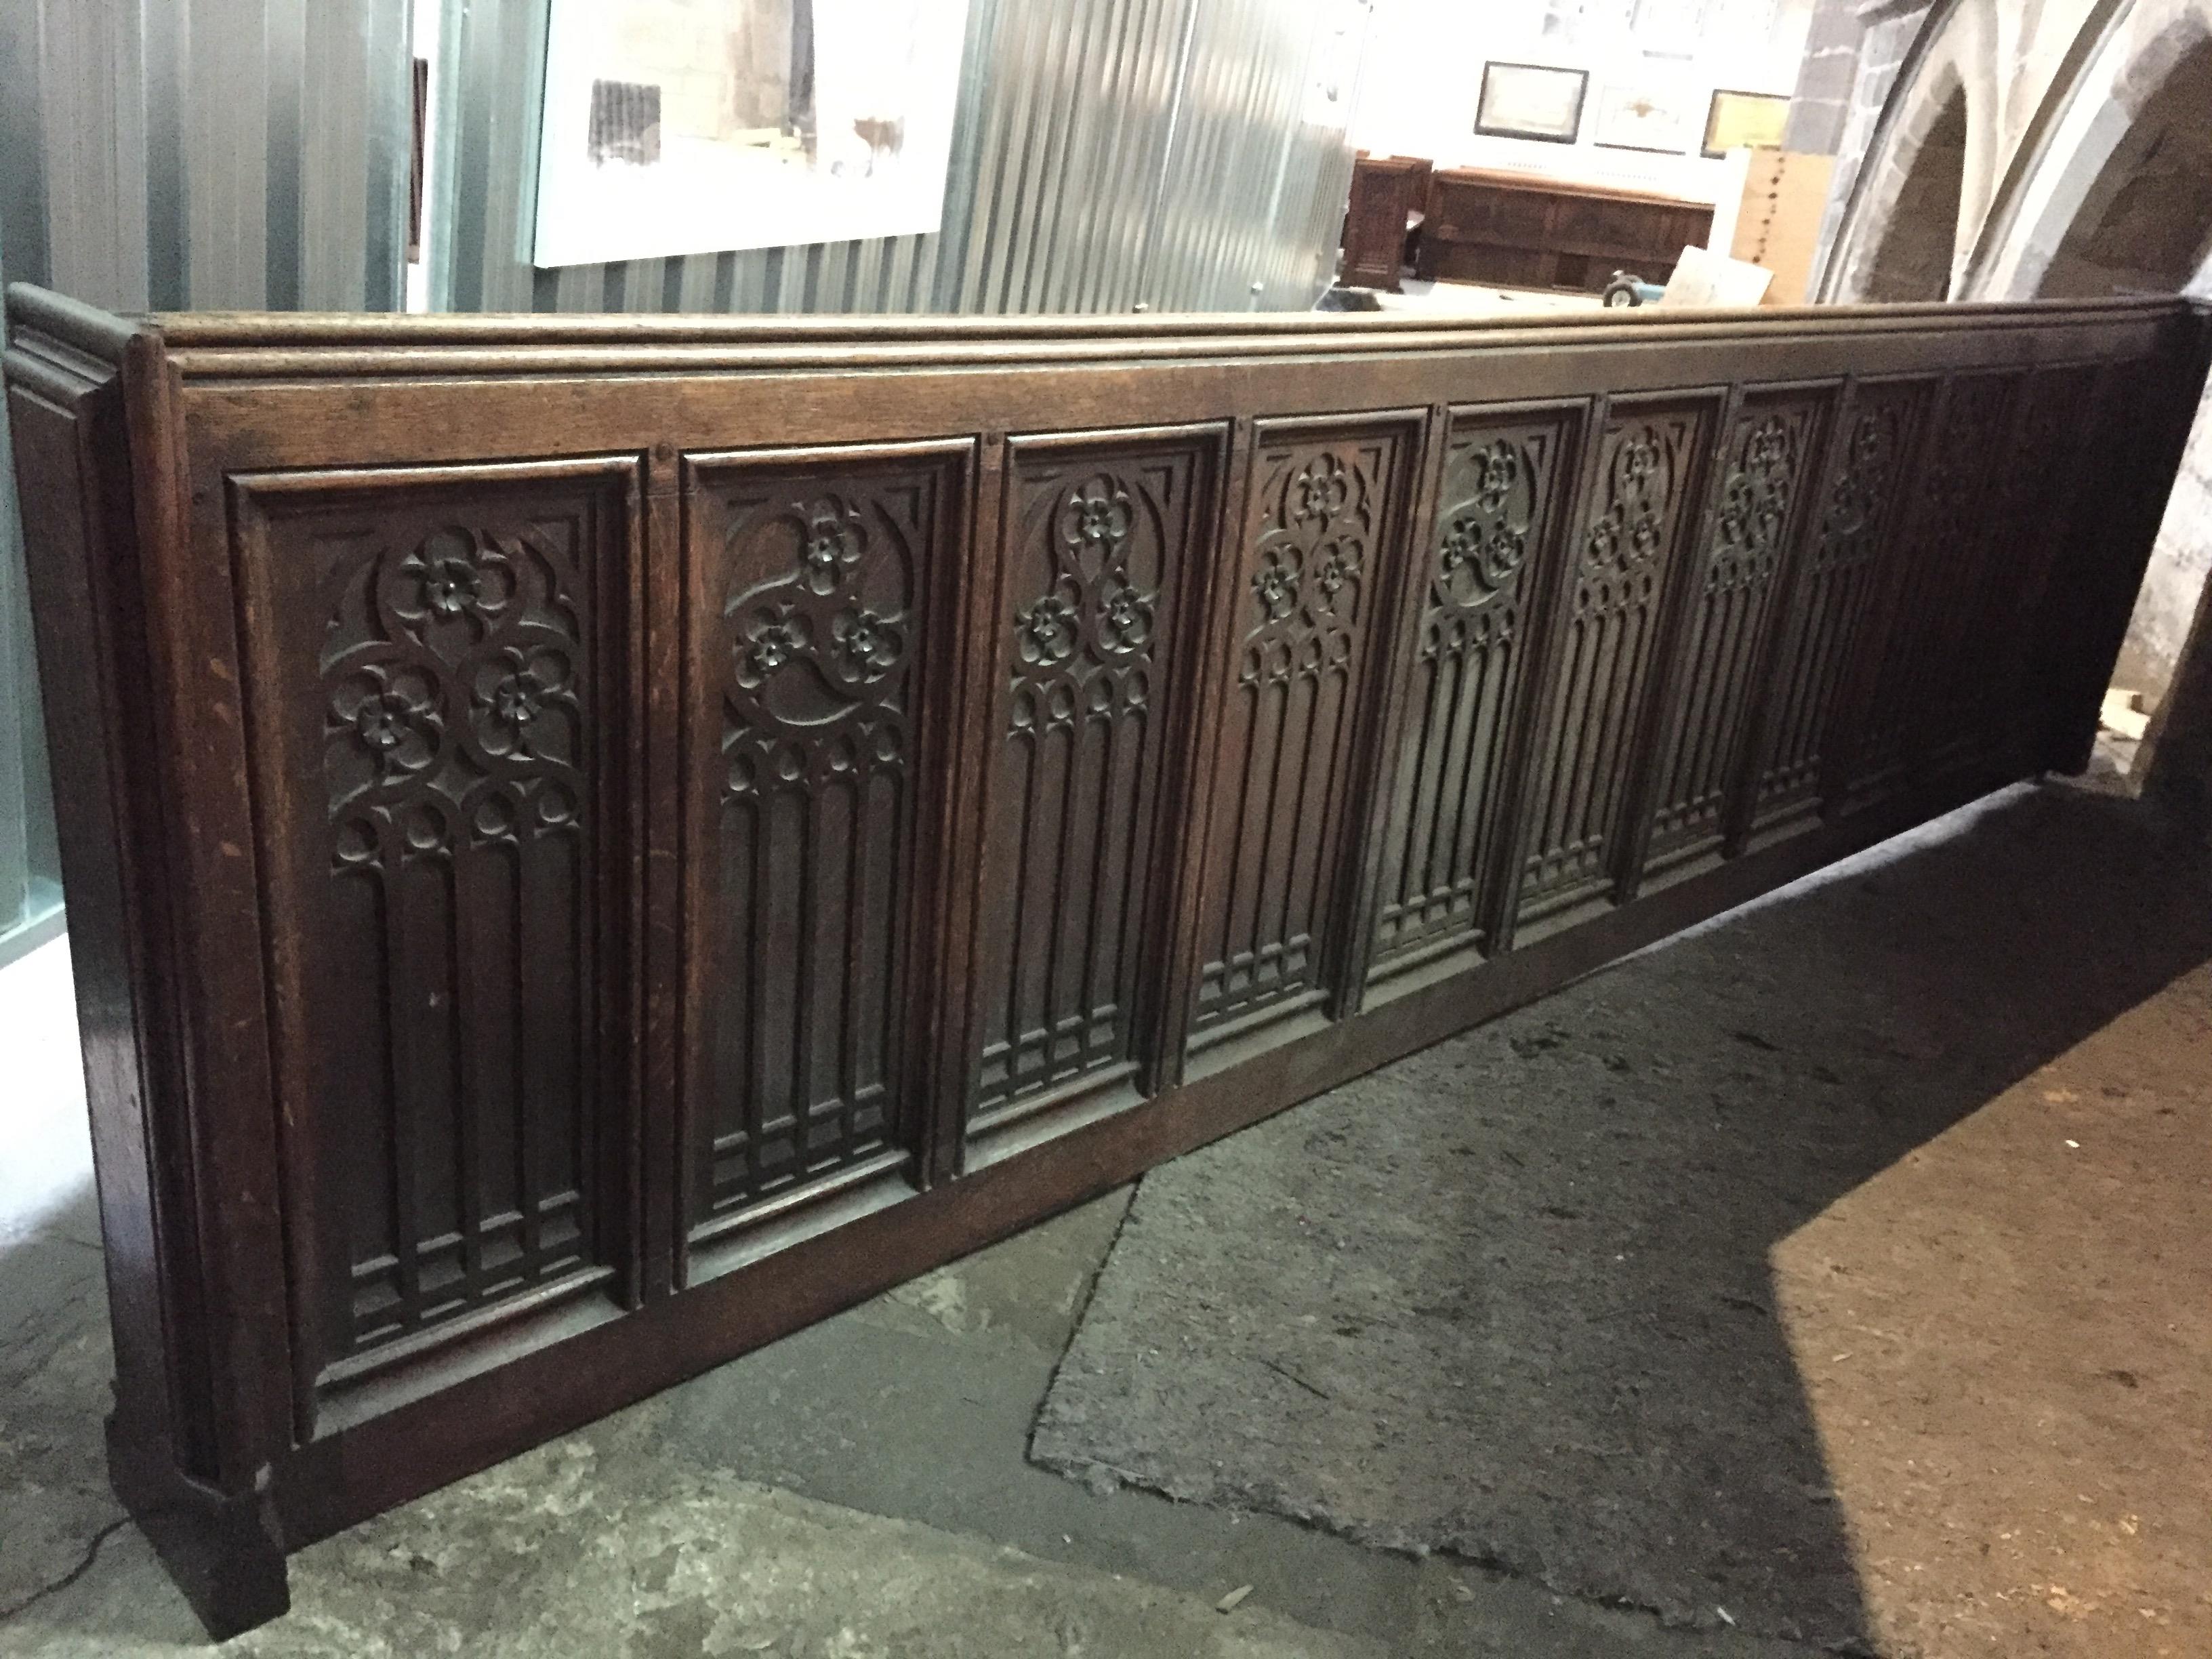 A carved oak front rail, length 336 cm, height 86 cm.